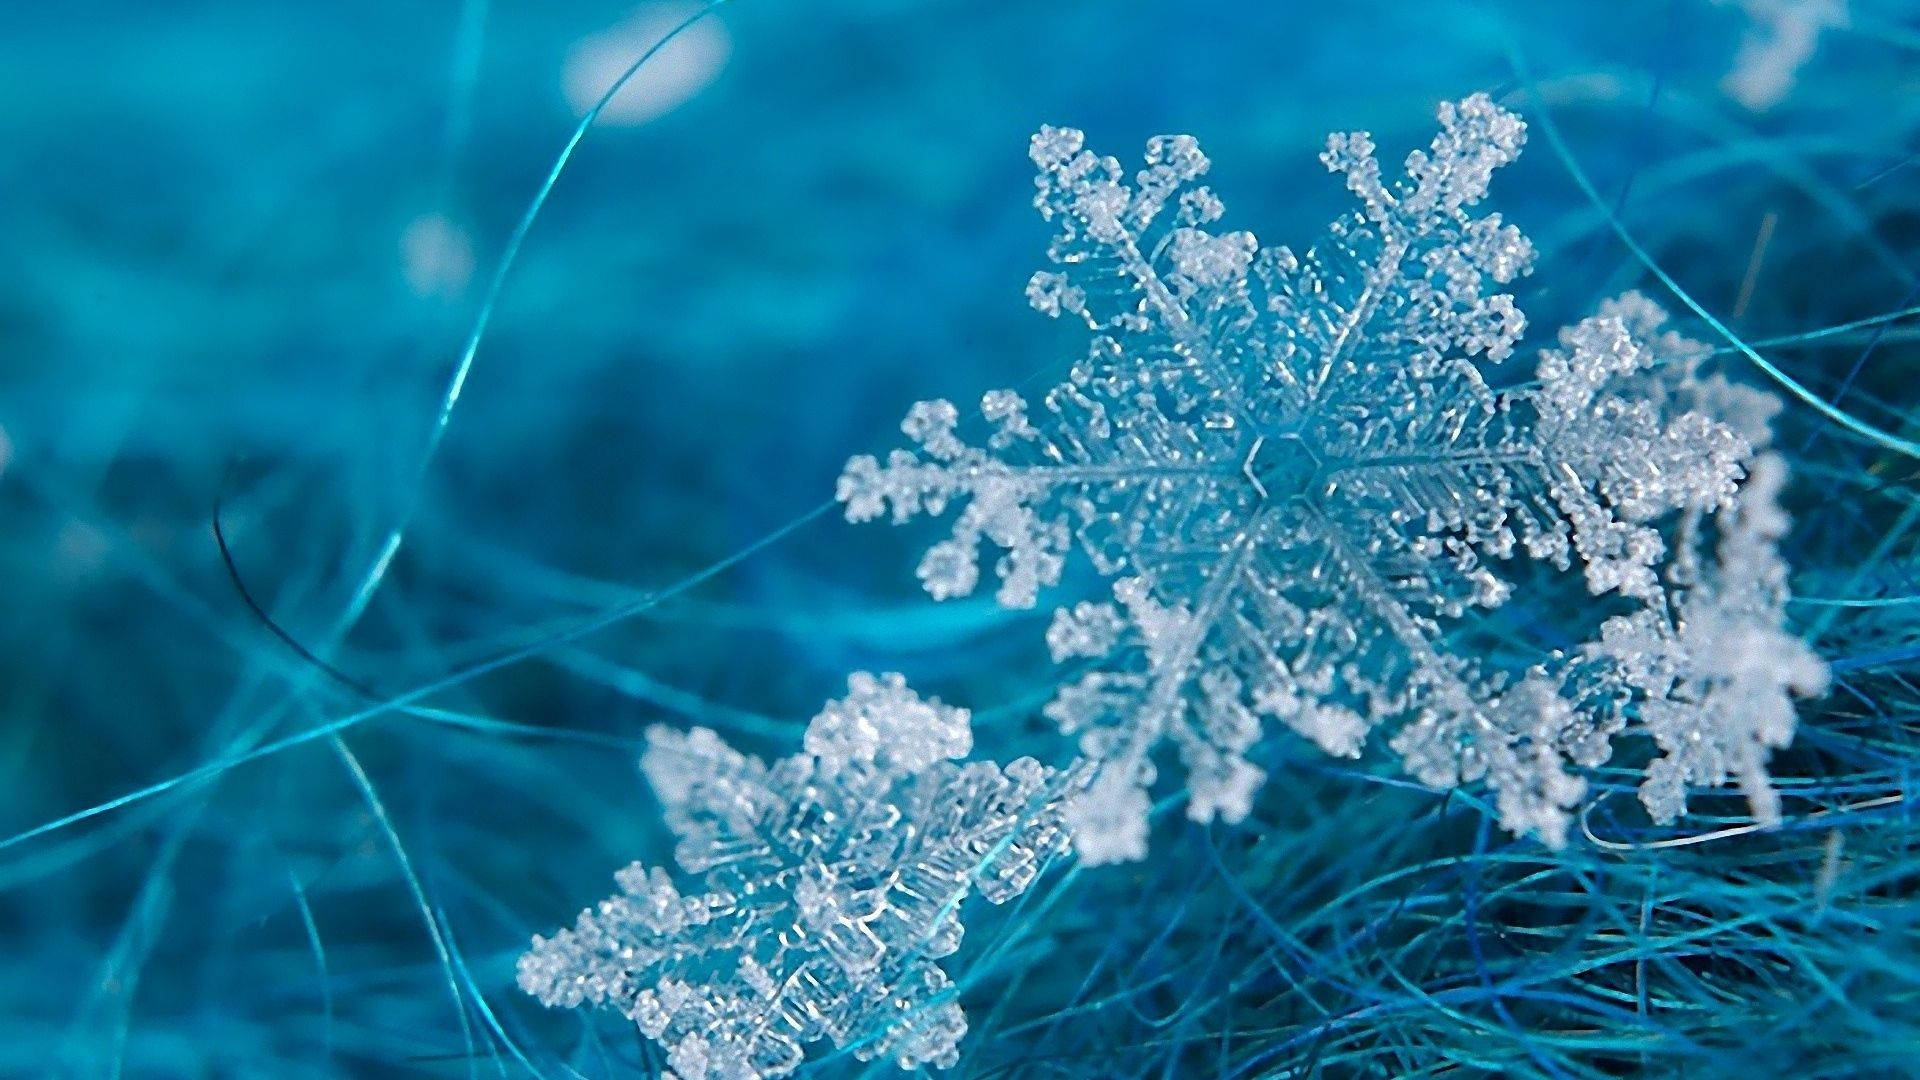 1920X1080 Snowflake Wallpaper and Background